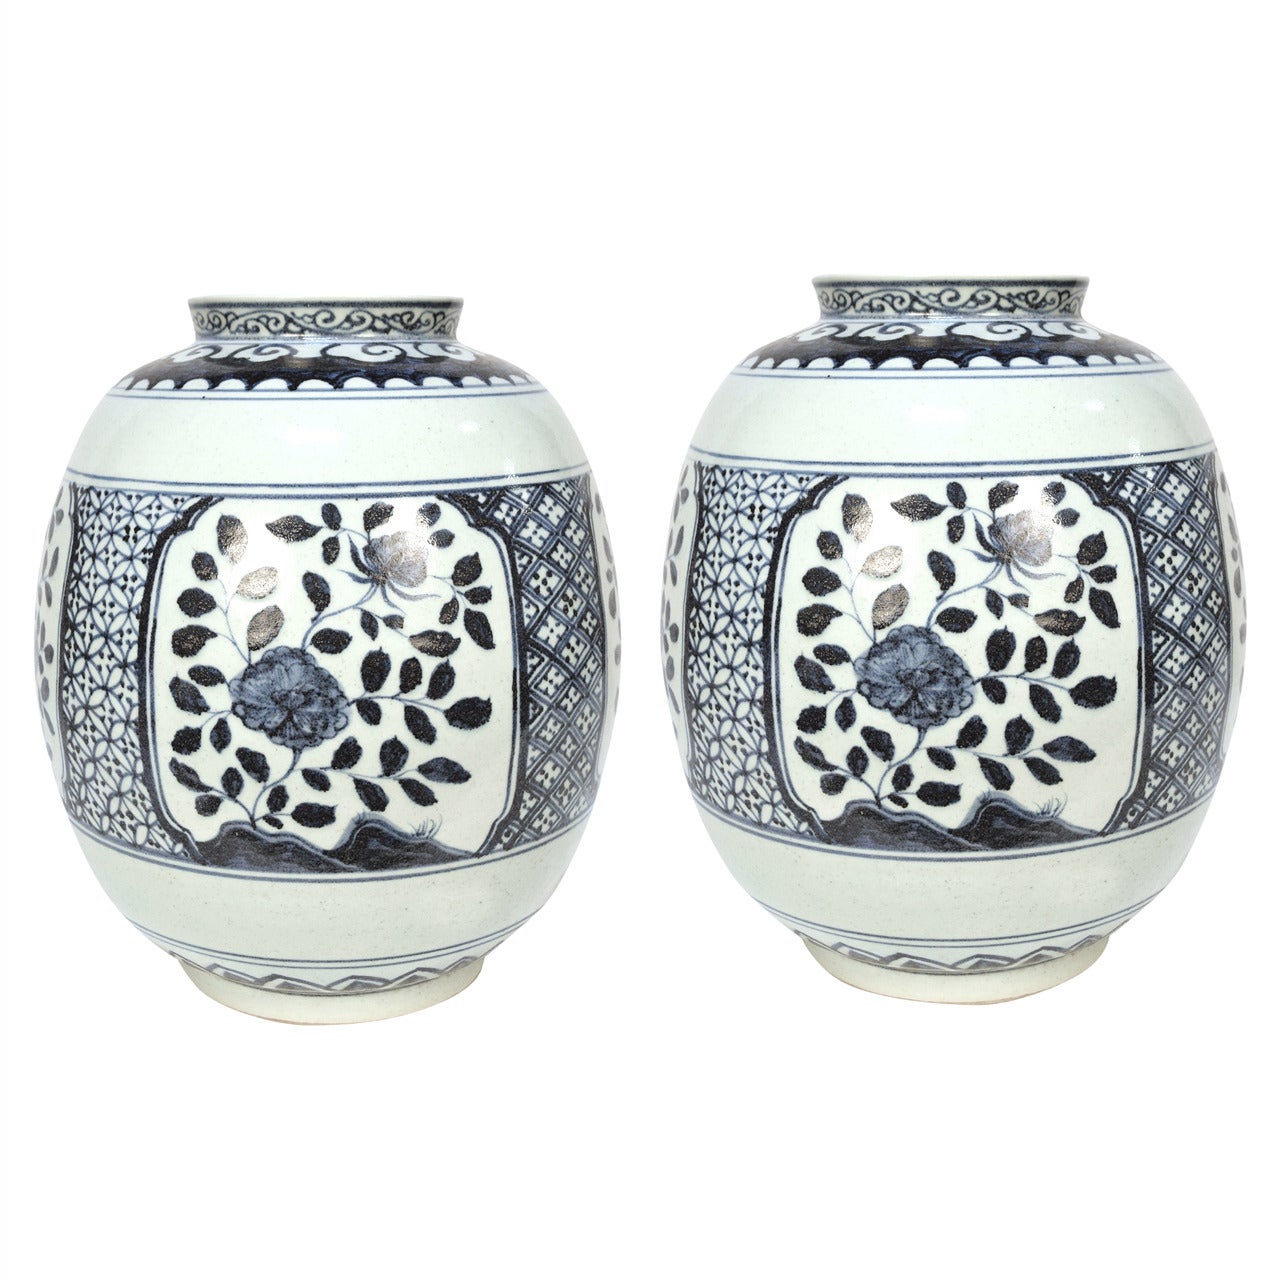 Pair of Floral Indigo Blue and White Jars